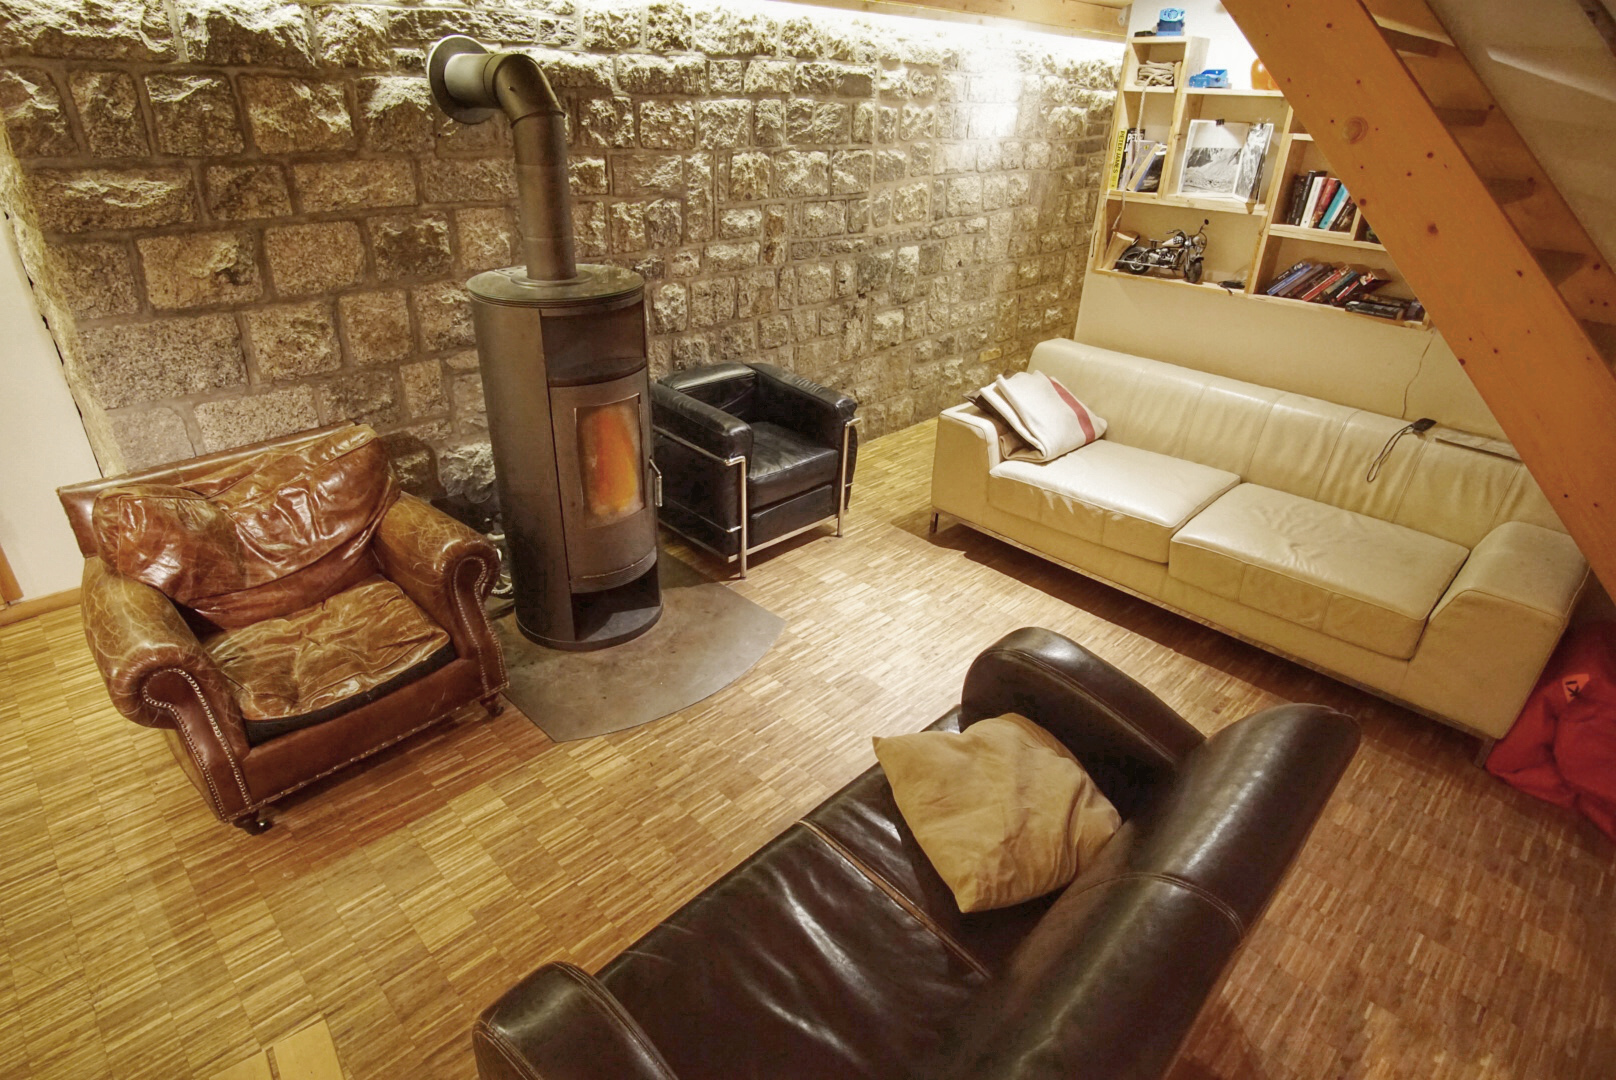 Relax next to the wood stove in our lodge